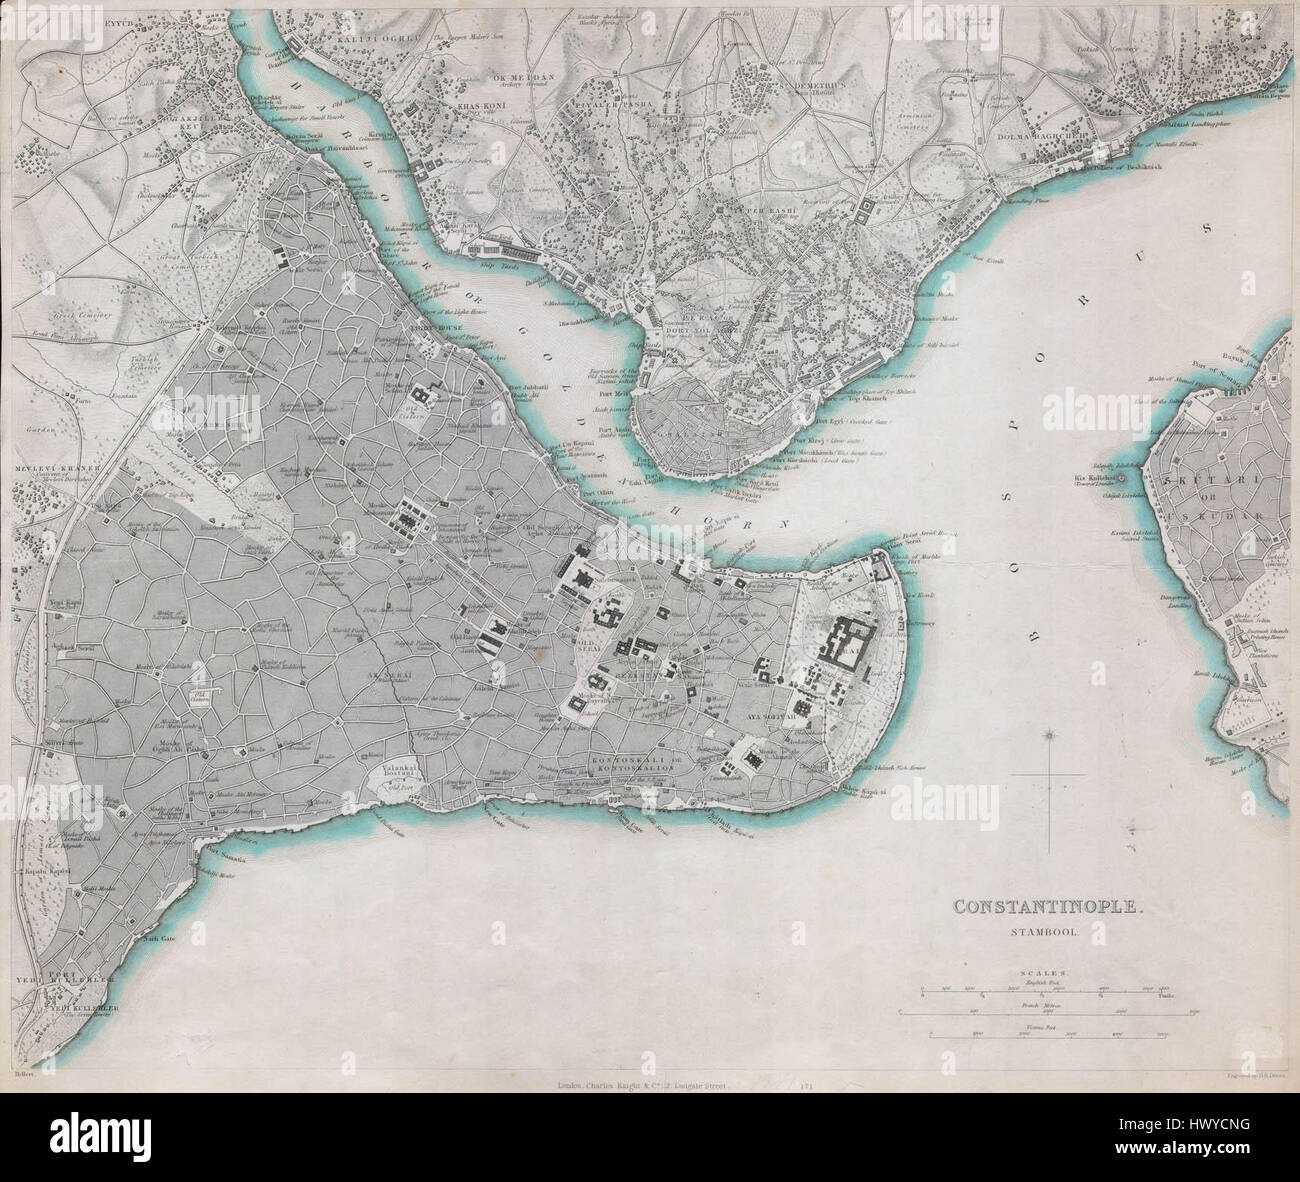 1840 S.D.U.K. Map of Constantinople ( Istanbul, Turkey )   Geographicus   Istanbul sduk 1841 Stock Photo